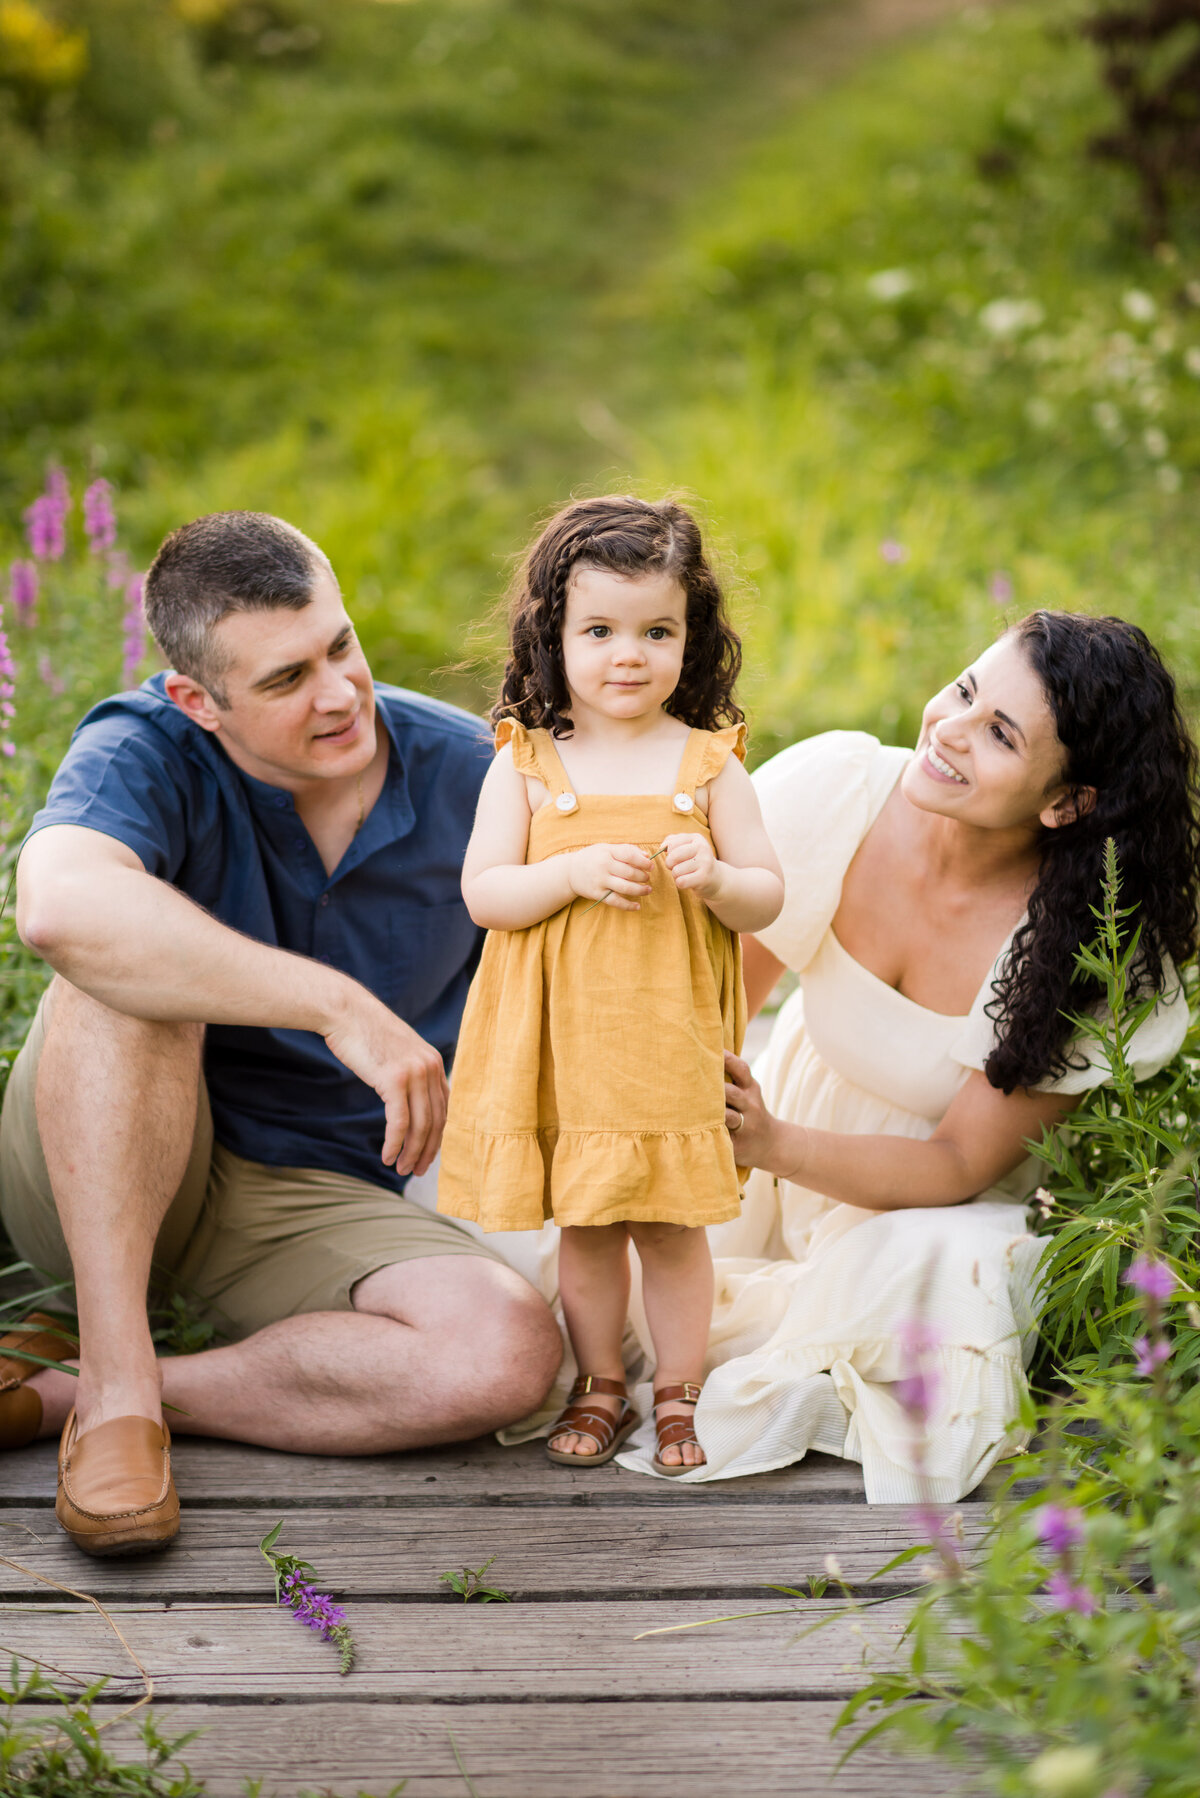 Boston-family-photographer-bella-wang-photography-Lifestyle-session-outdoor-wildflower-8